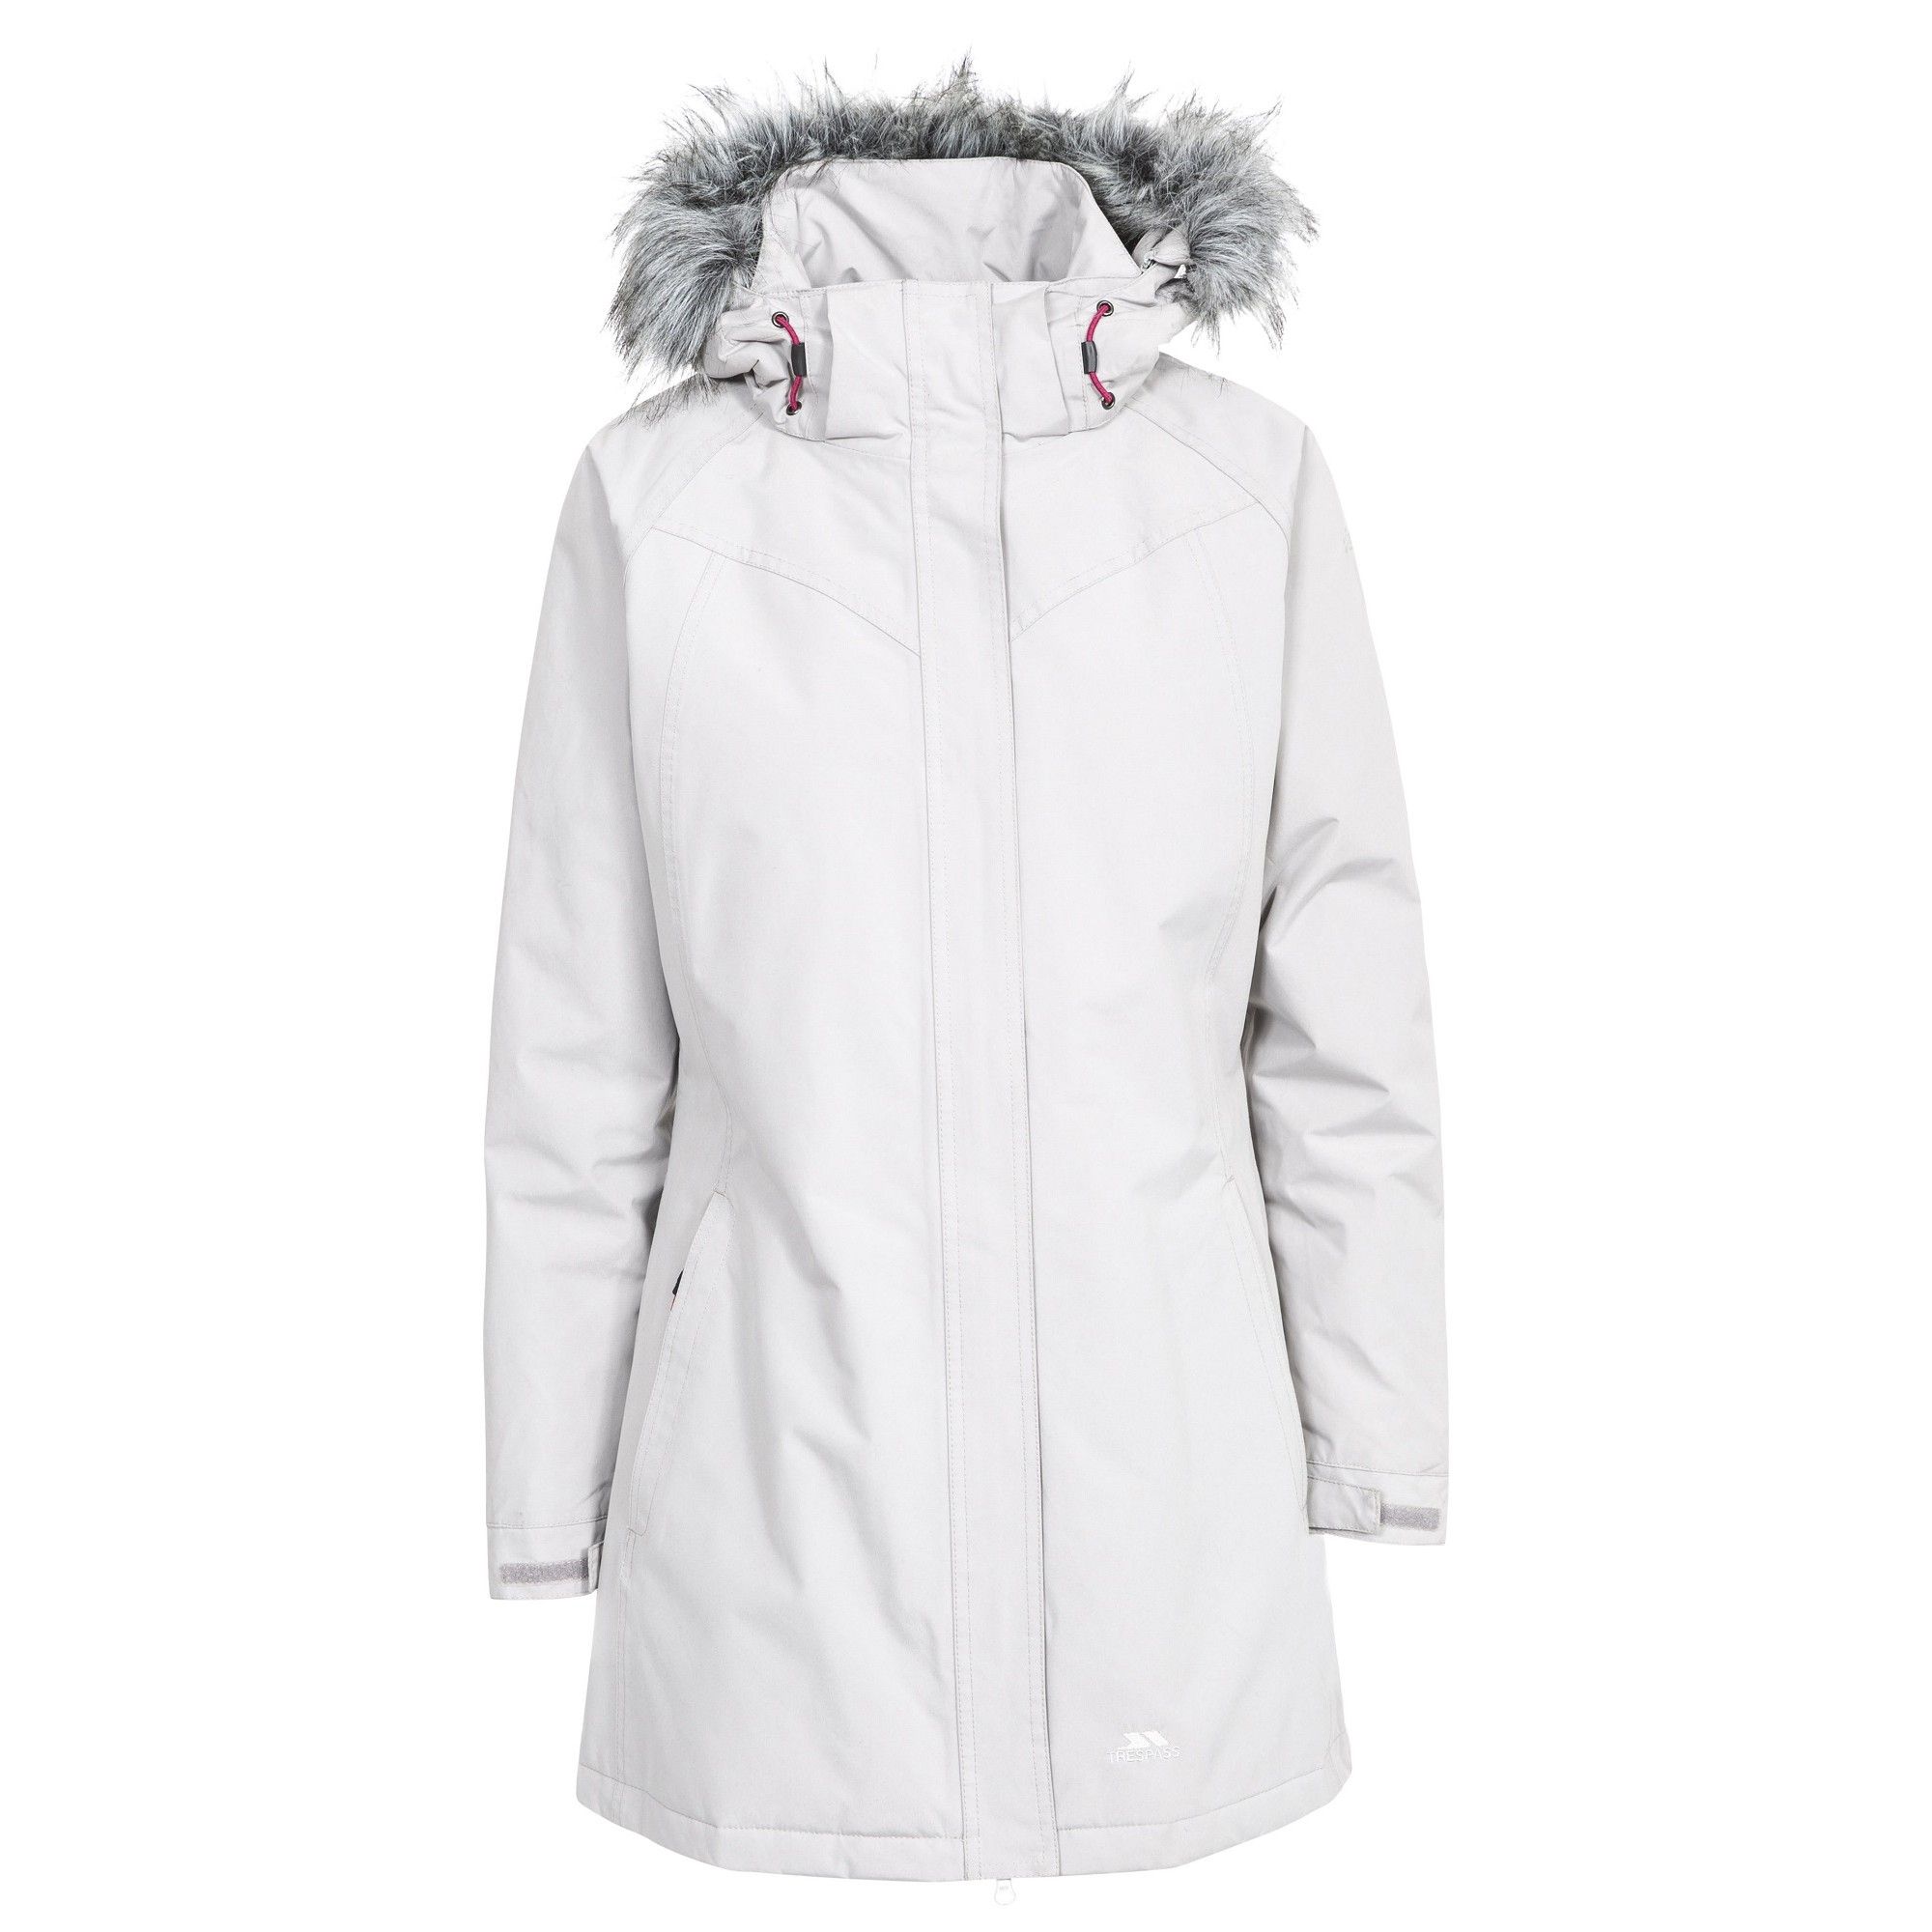 Padded. Printed lining. 2 zip pockets. Detachable zip off hood. Zip off faux fur hood trim. Adjustable cuffs. Longer length. Waterproof 5000mm, windproof. Taped seams. Shell: 100% Polyester microfibre PVC, Lining: 100% Polyester, Padding: 100% Polyester.